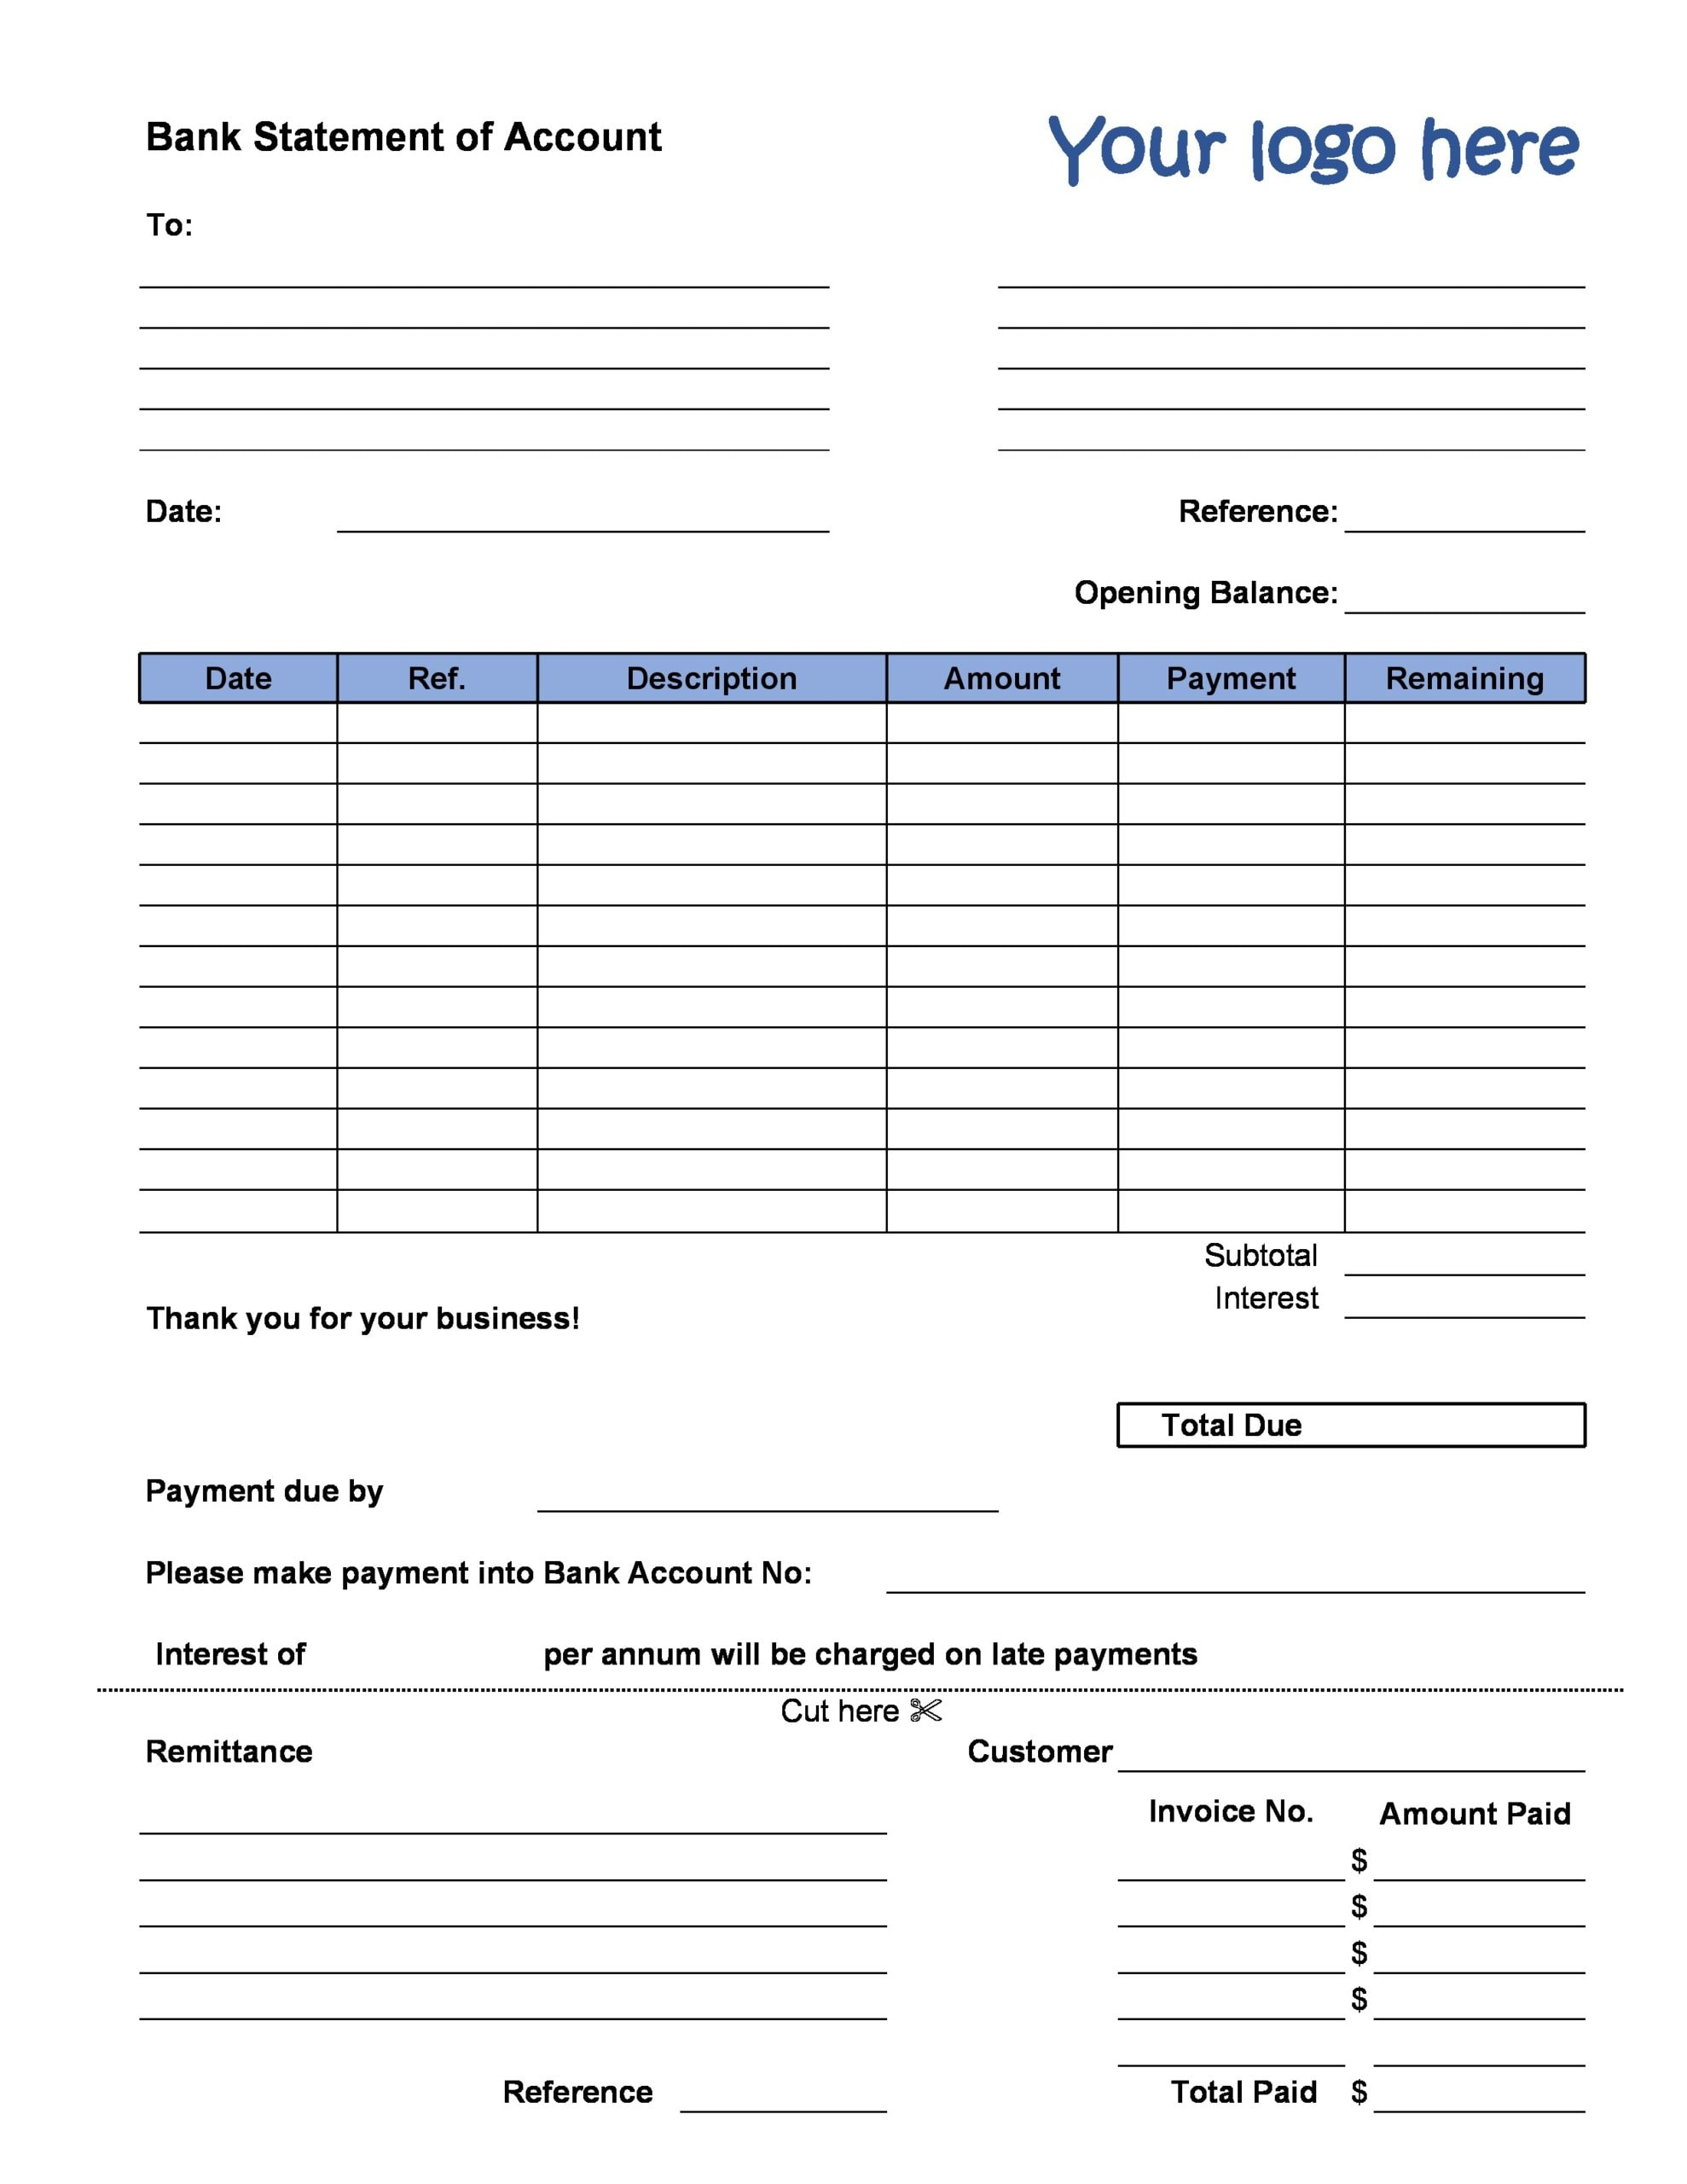 10 Real & Fake Bank Statement Templates [Editable] With Blank Bank Statement Template Download